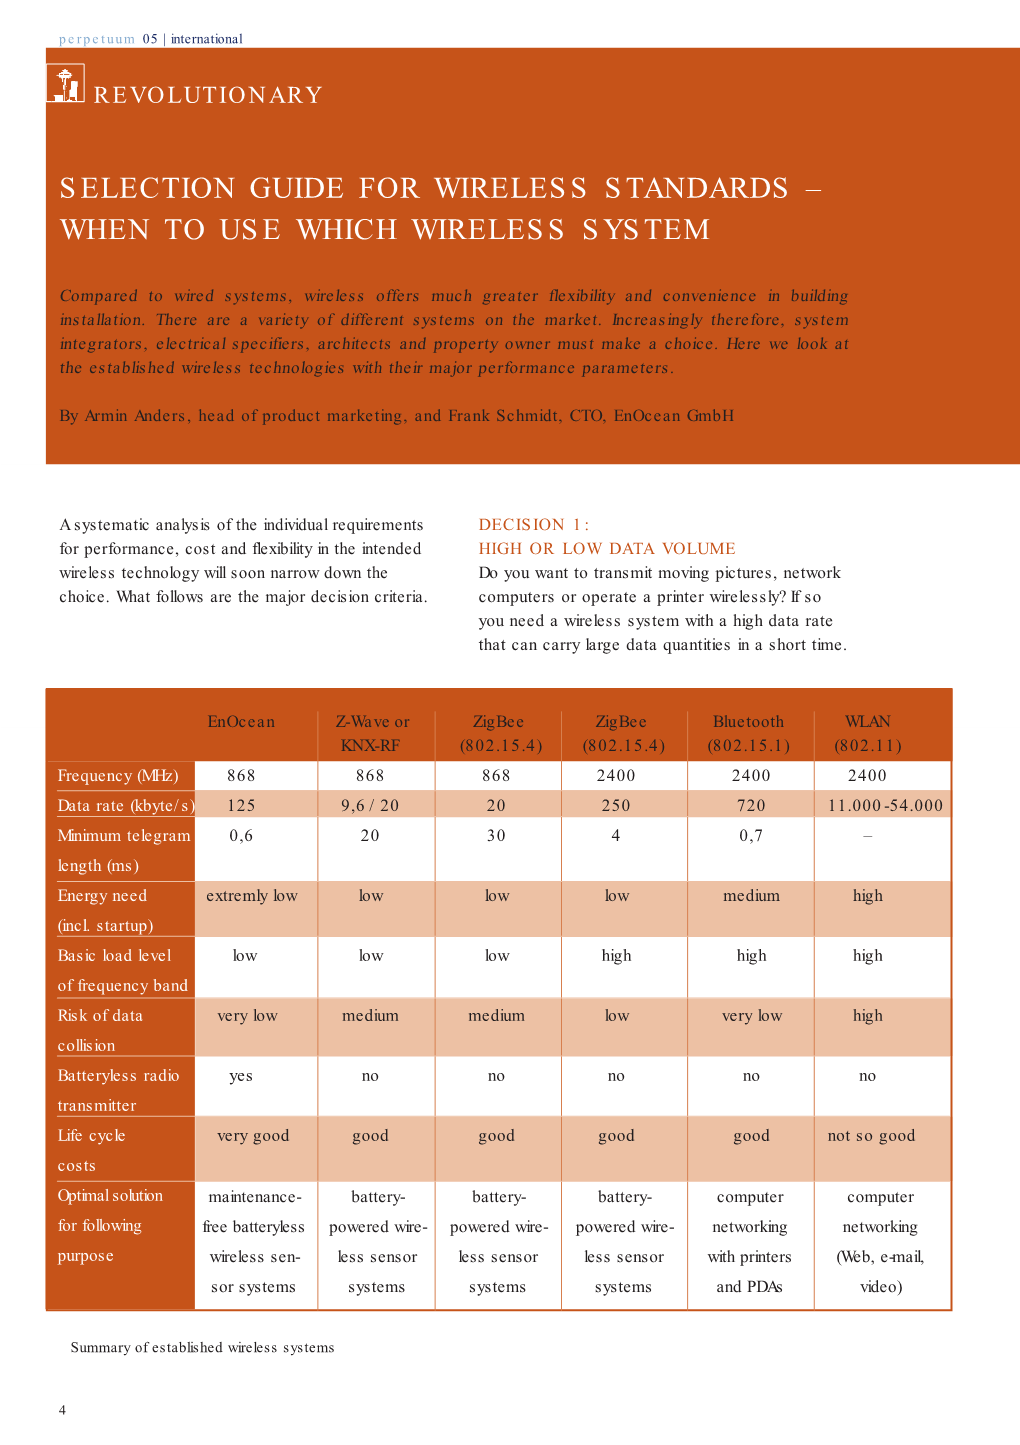 Selection Guide for Wireless Standards – When to Use Which Wireless System